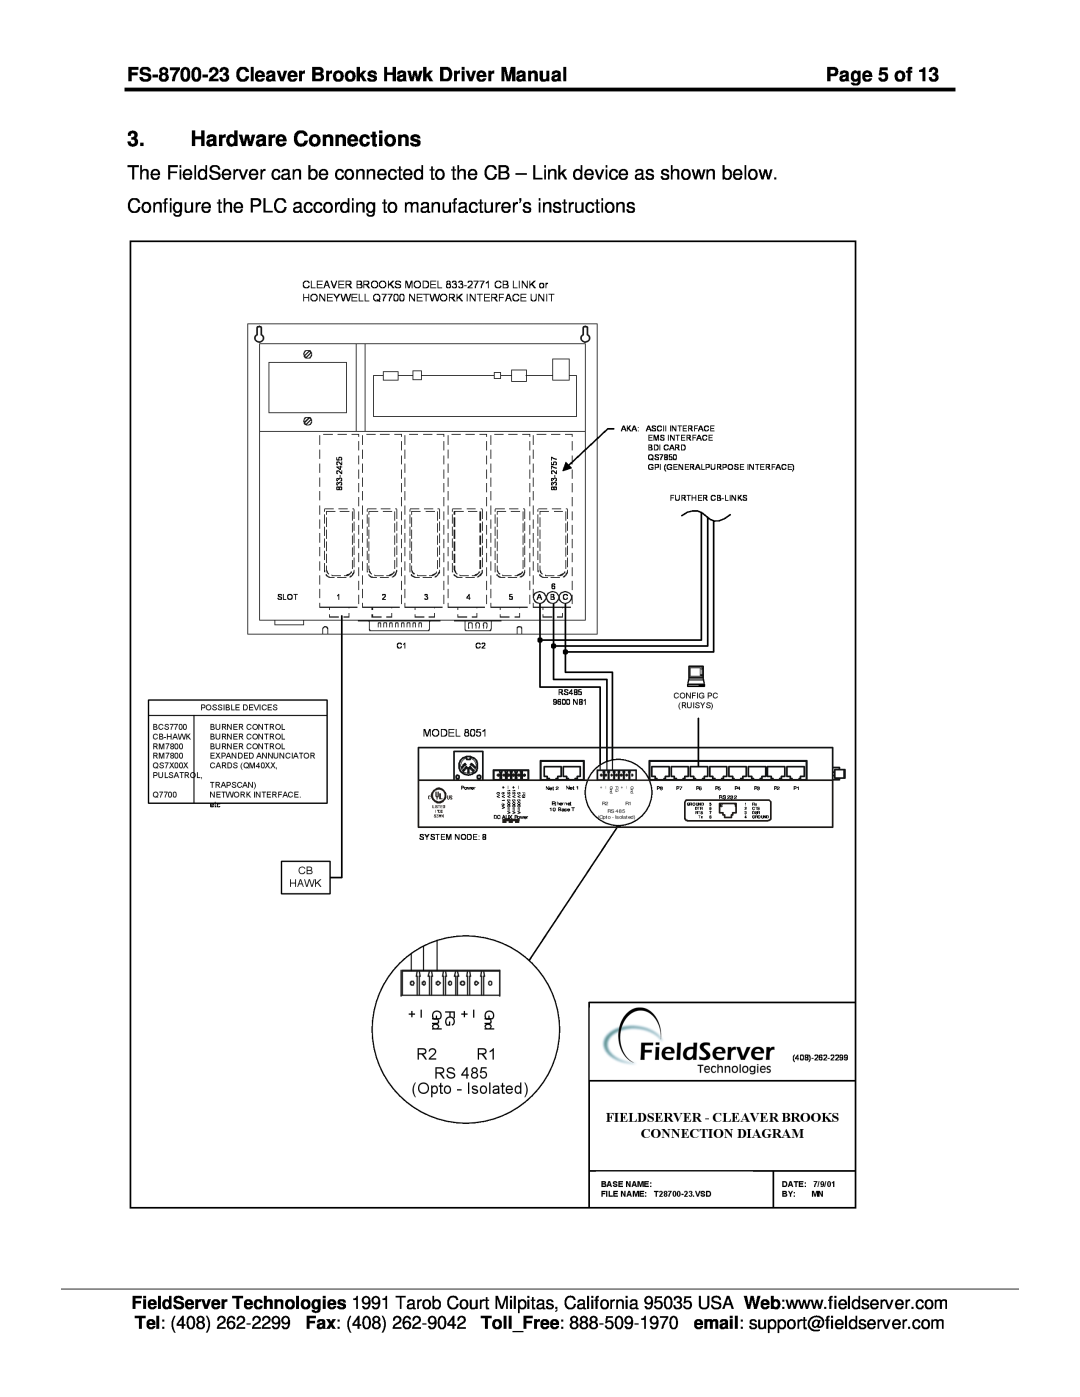 FieldServer Hardware Connections, Page 5 of, FS-8700-23 Cleaver Brooks Hawk Driver Manual, Tel 408, Fax 408, TollFree 